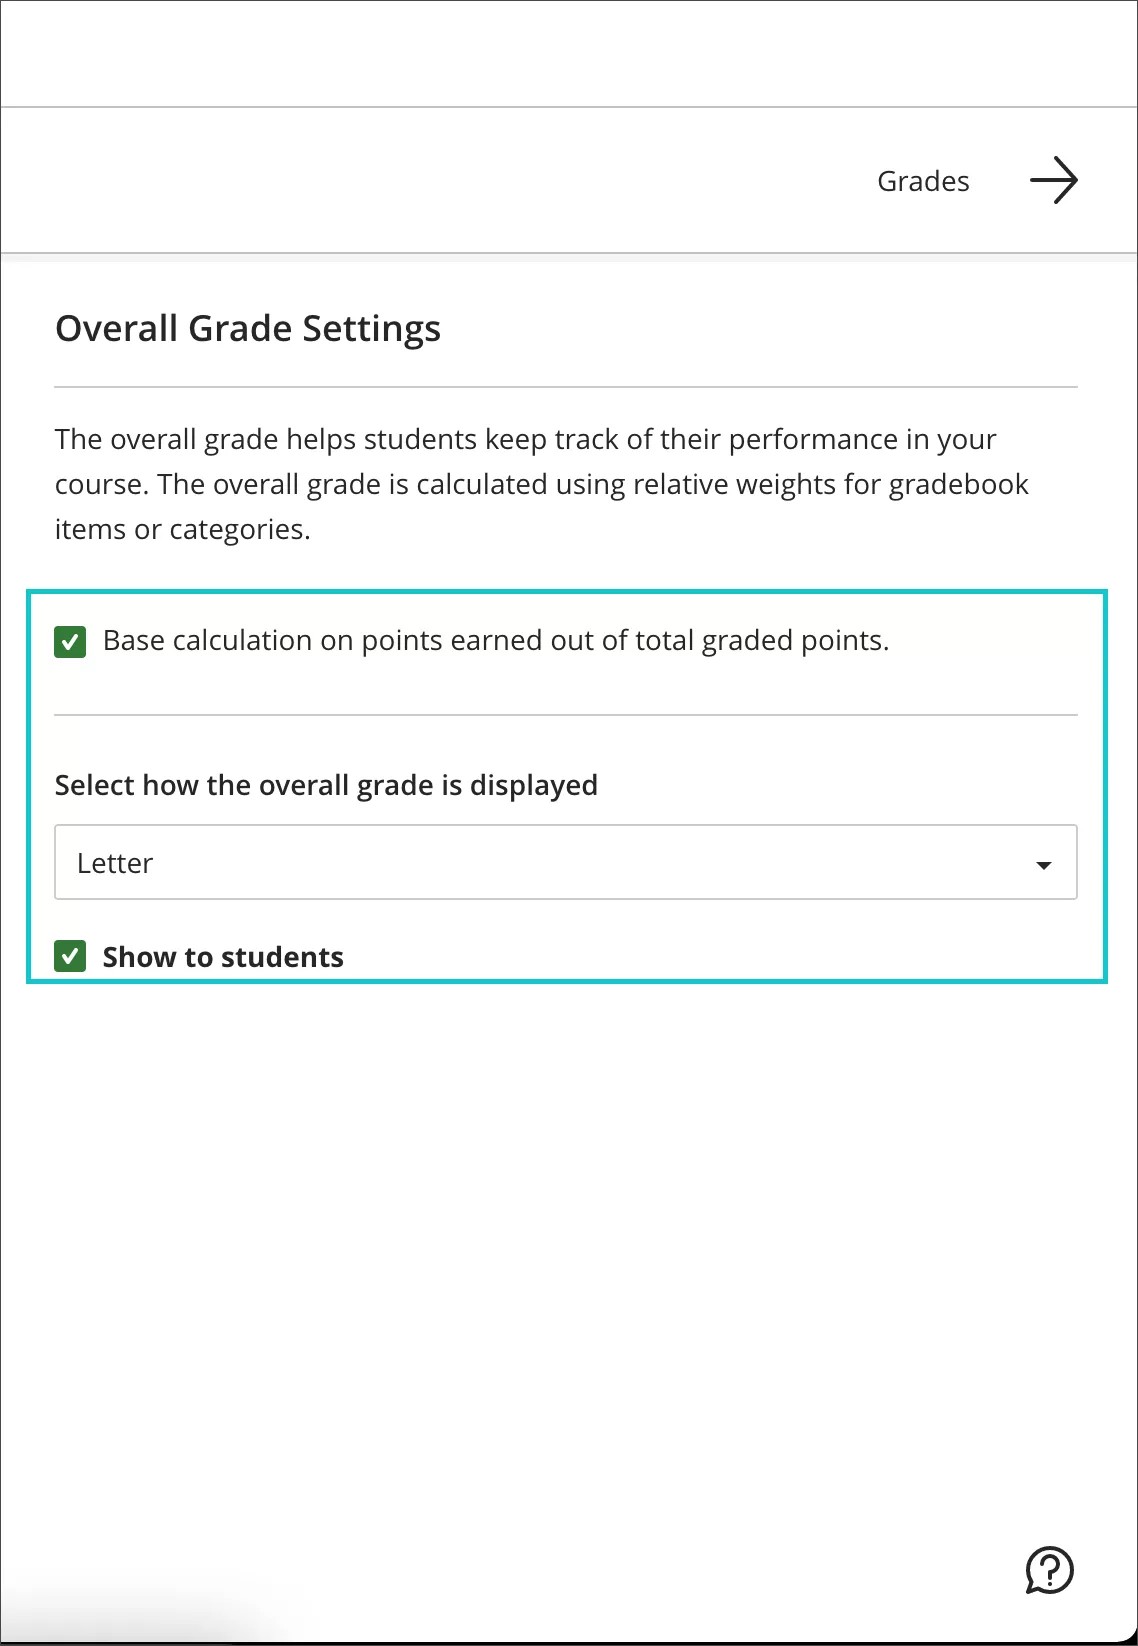 Instructor view of Overall Grade Settings - After